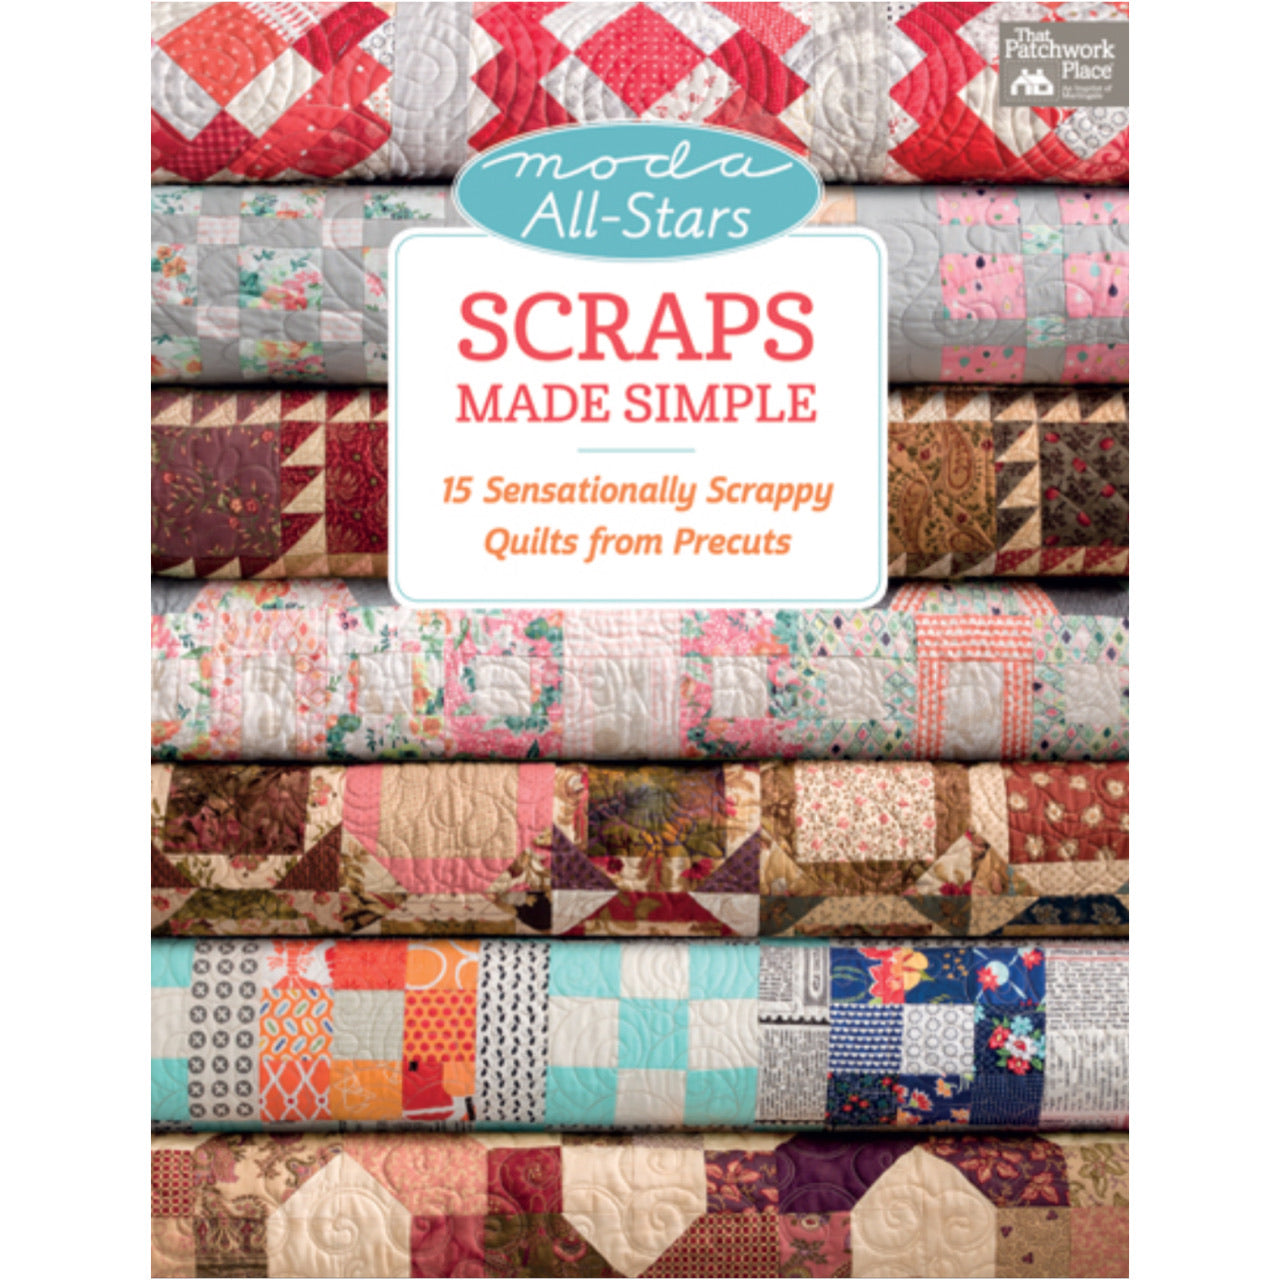 Scraps Made Simple by Moda